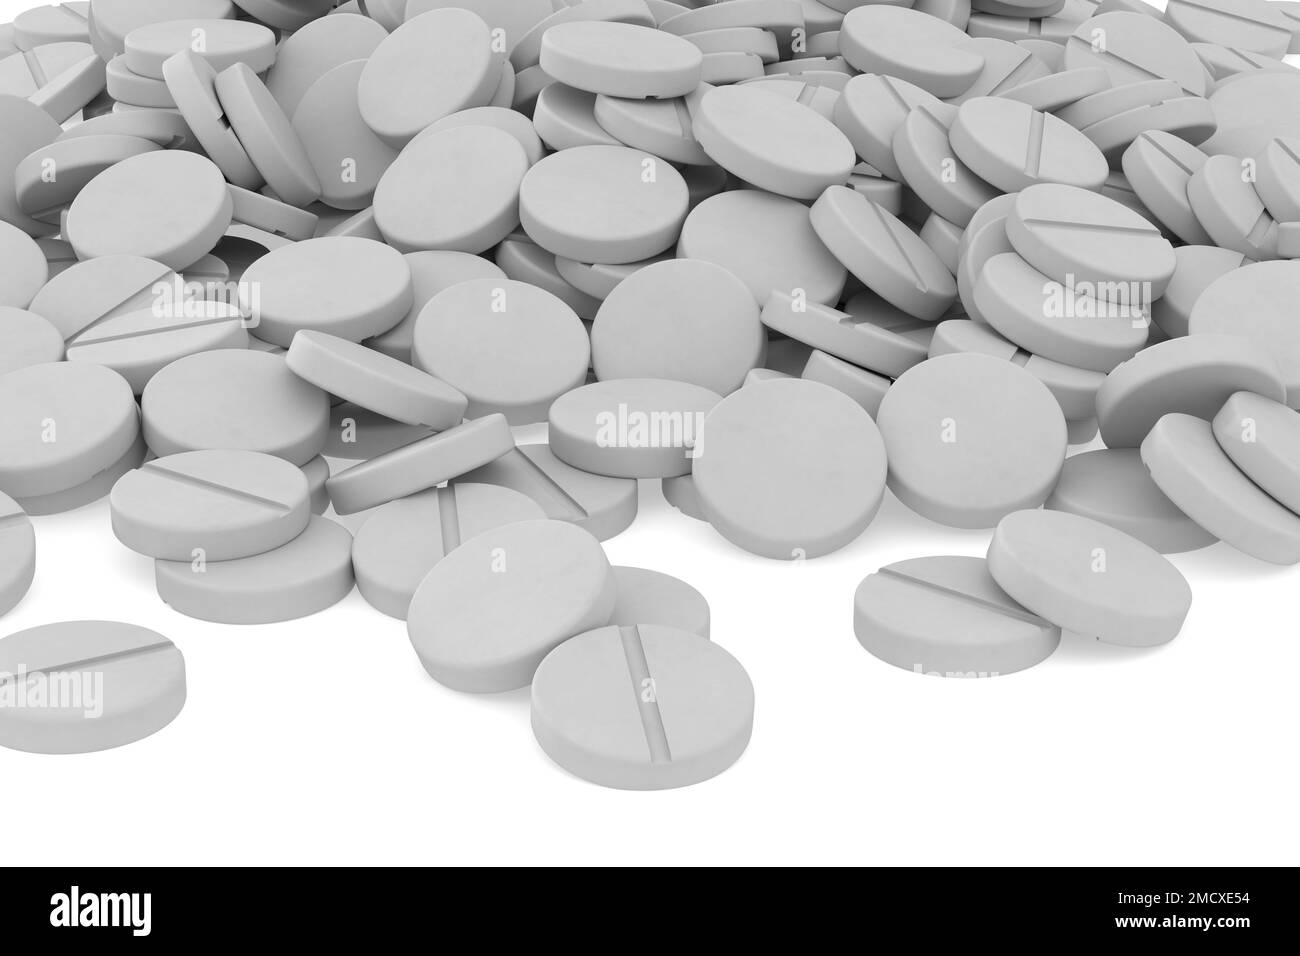 falling tablets on white background. Isolated 3D illustration Stock Photo